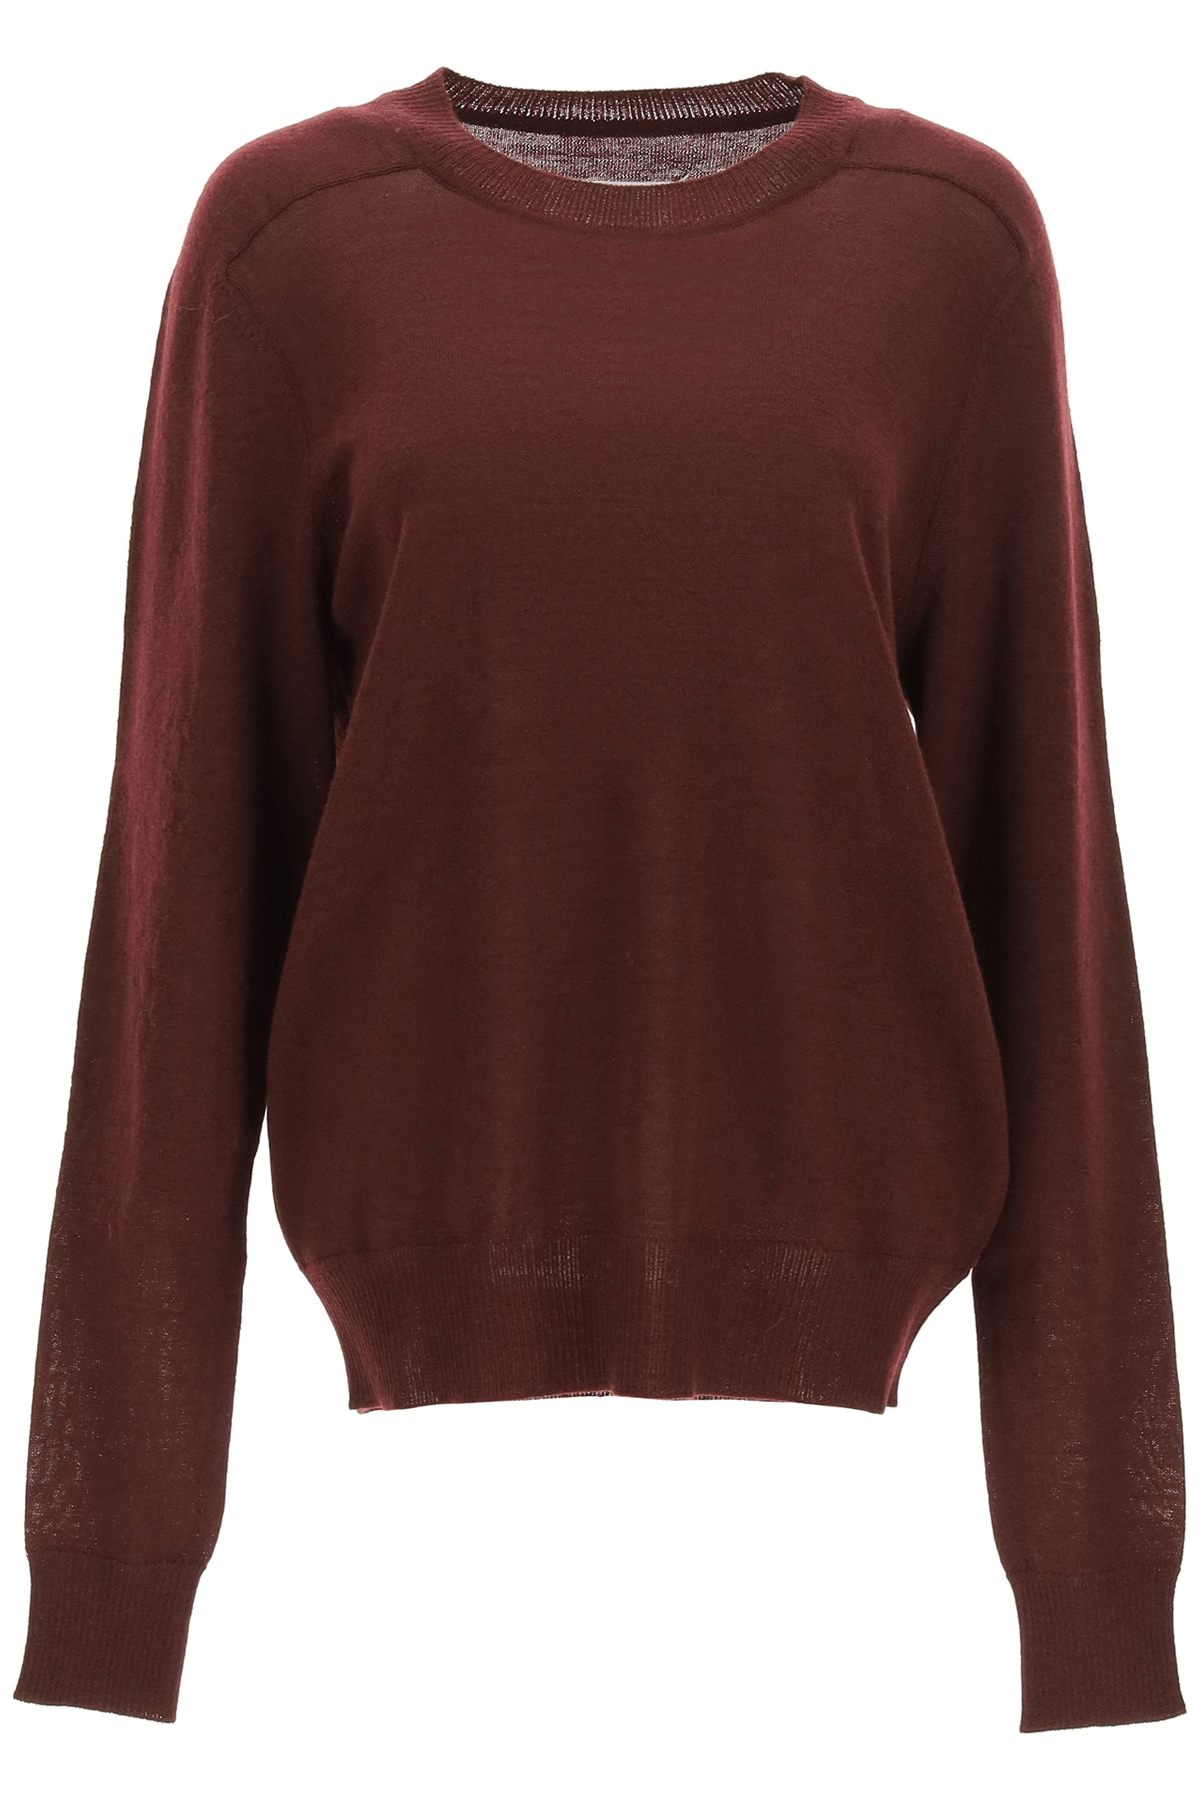 MAISON MARGIELA STICHING SWEATER WITH SUEDE PATCHES